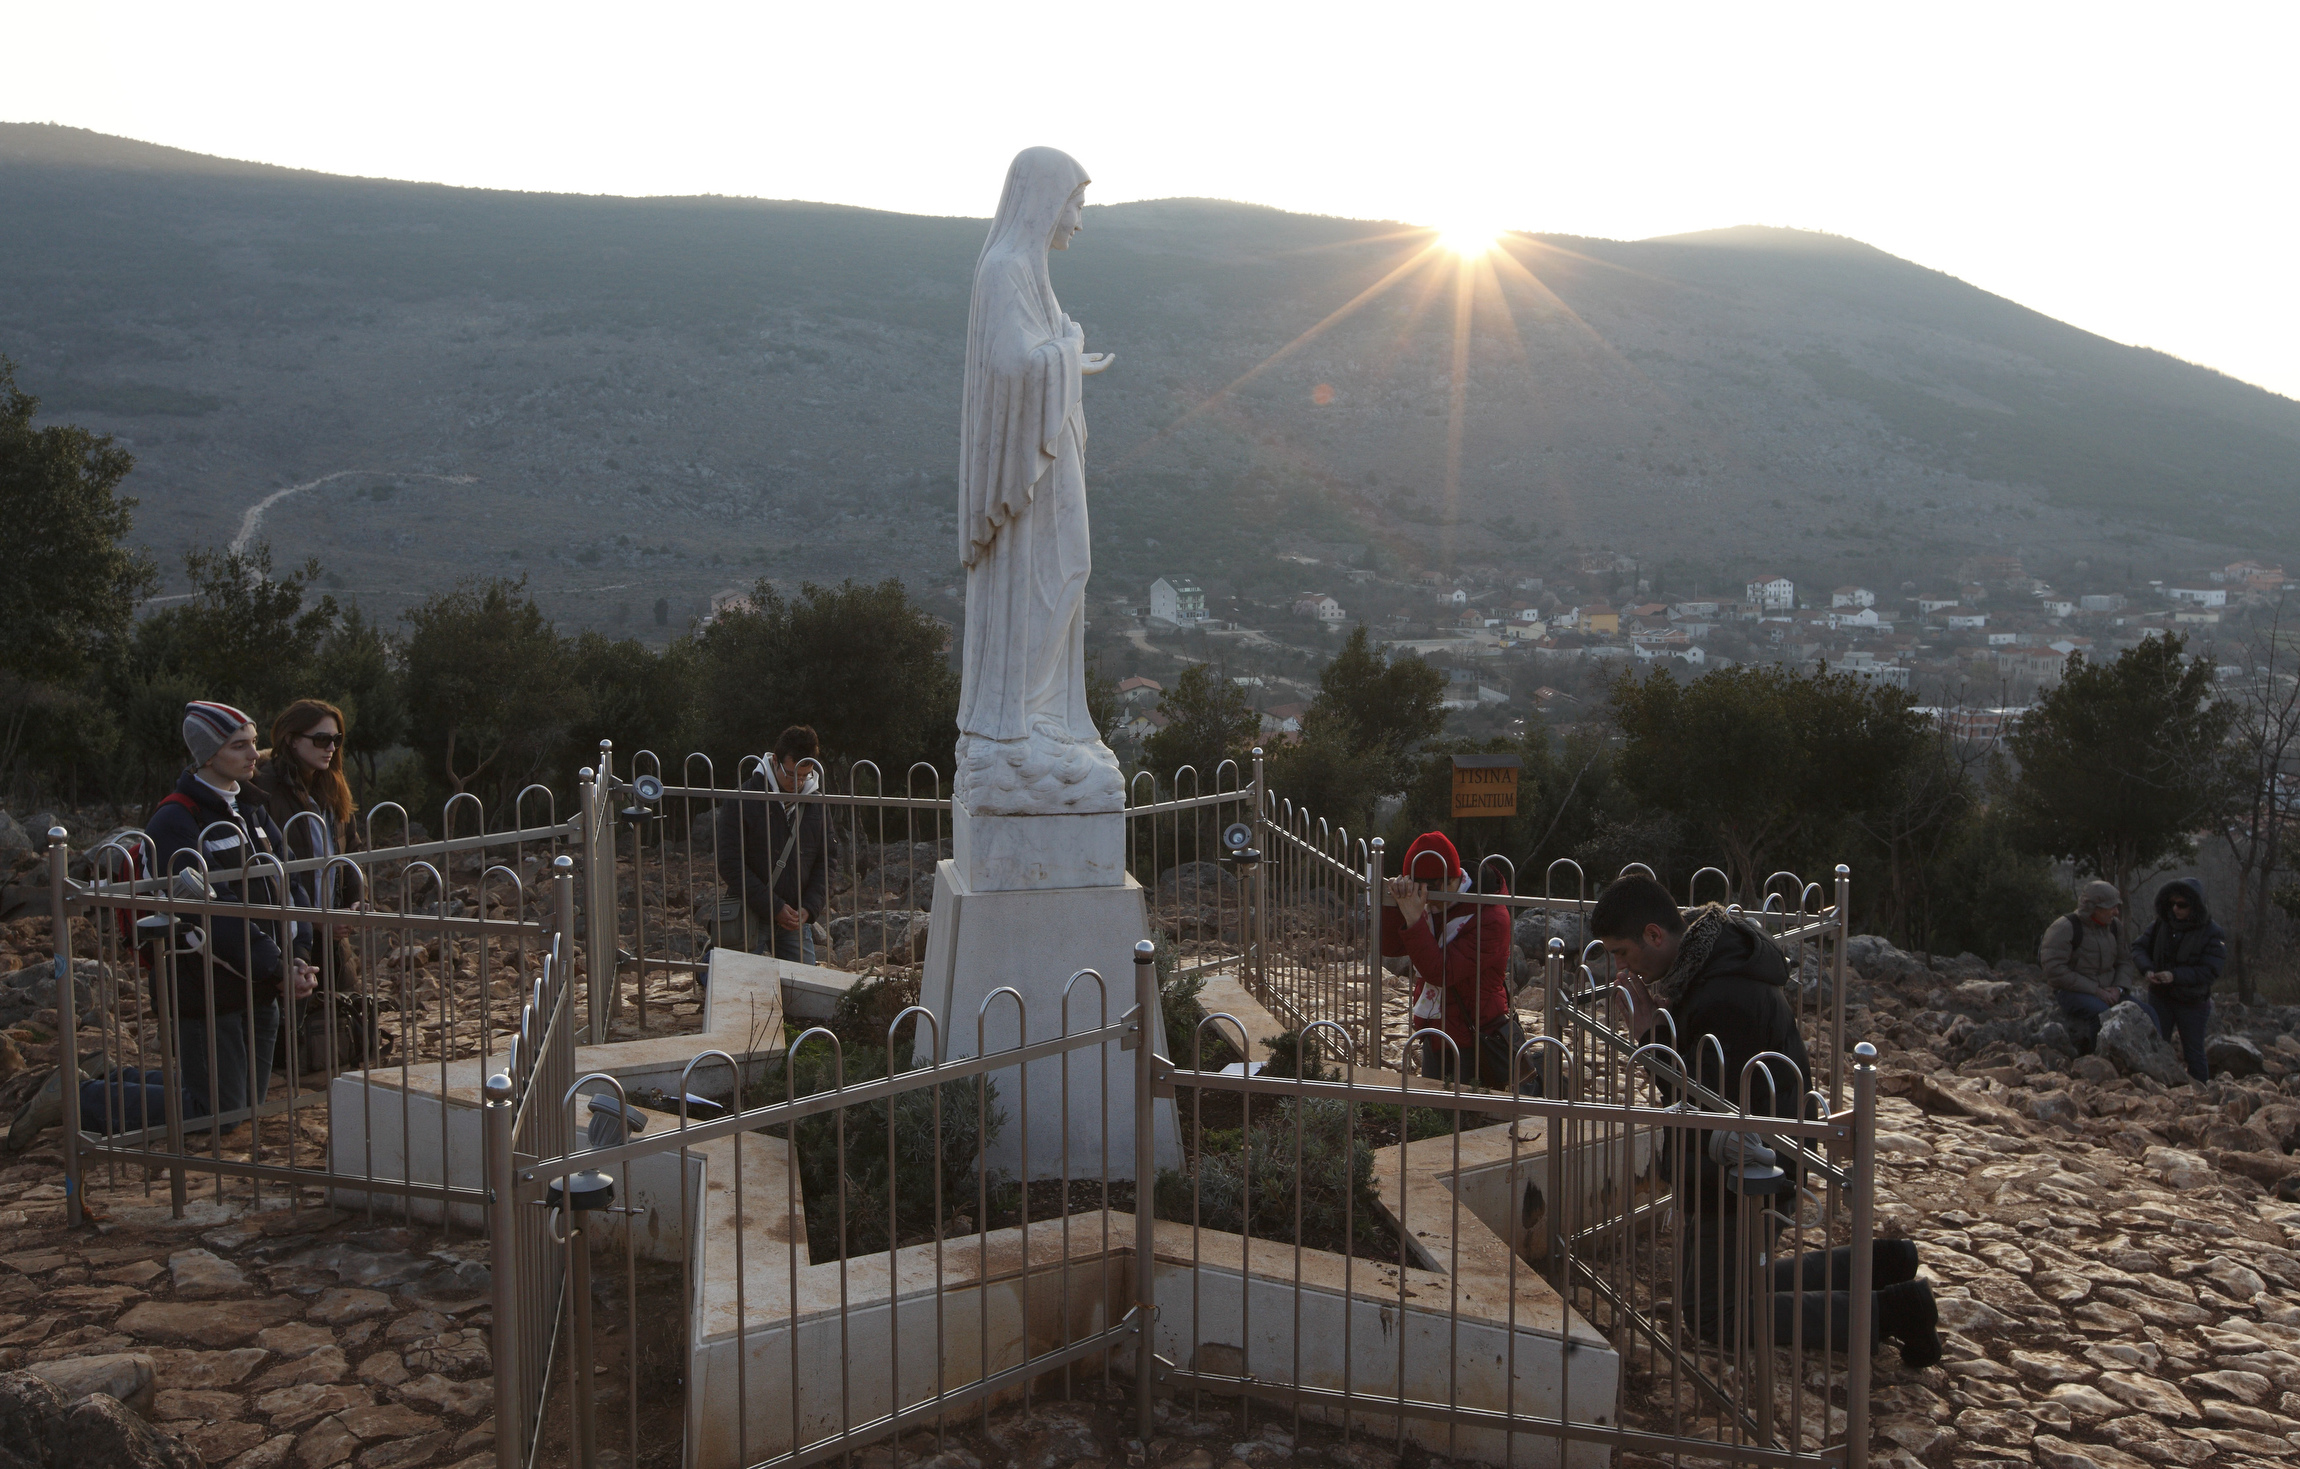 Pilgrims pray around a statue of Mary on Apparition Hill in Medjugorje, Bosnia-Herzegovina, Feb. 26. The site is where six village children first claimed to see Mary in June 1981. A Vatican-appointed commission is studying the alleged Marian apparitions at Medjugorje. CNS photo/Paul Haring) (Feb. 28, 2011) See MEDJUGORJE-PILGRIMS Feb. 28, 2011.